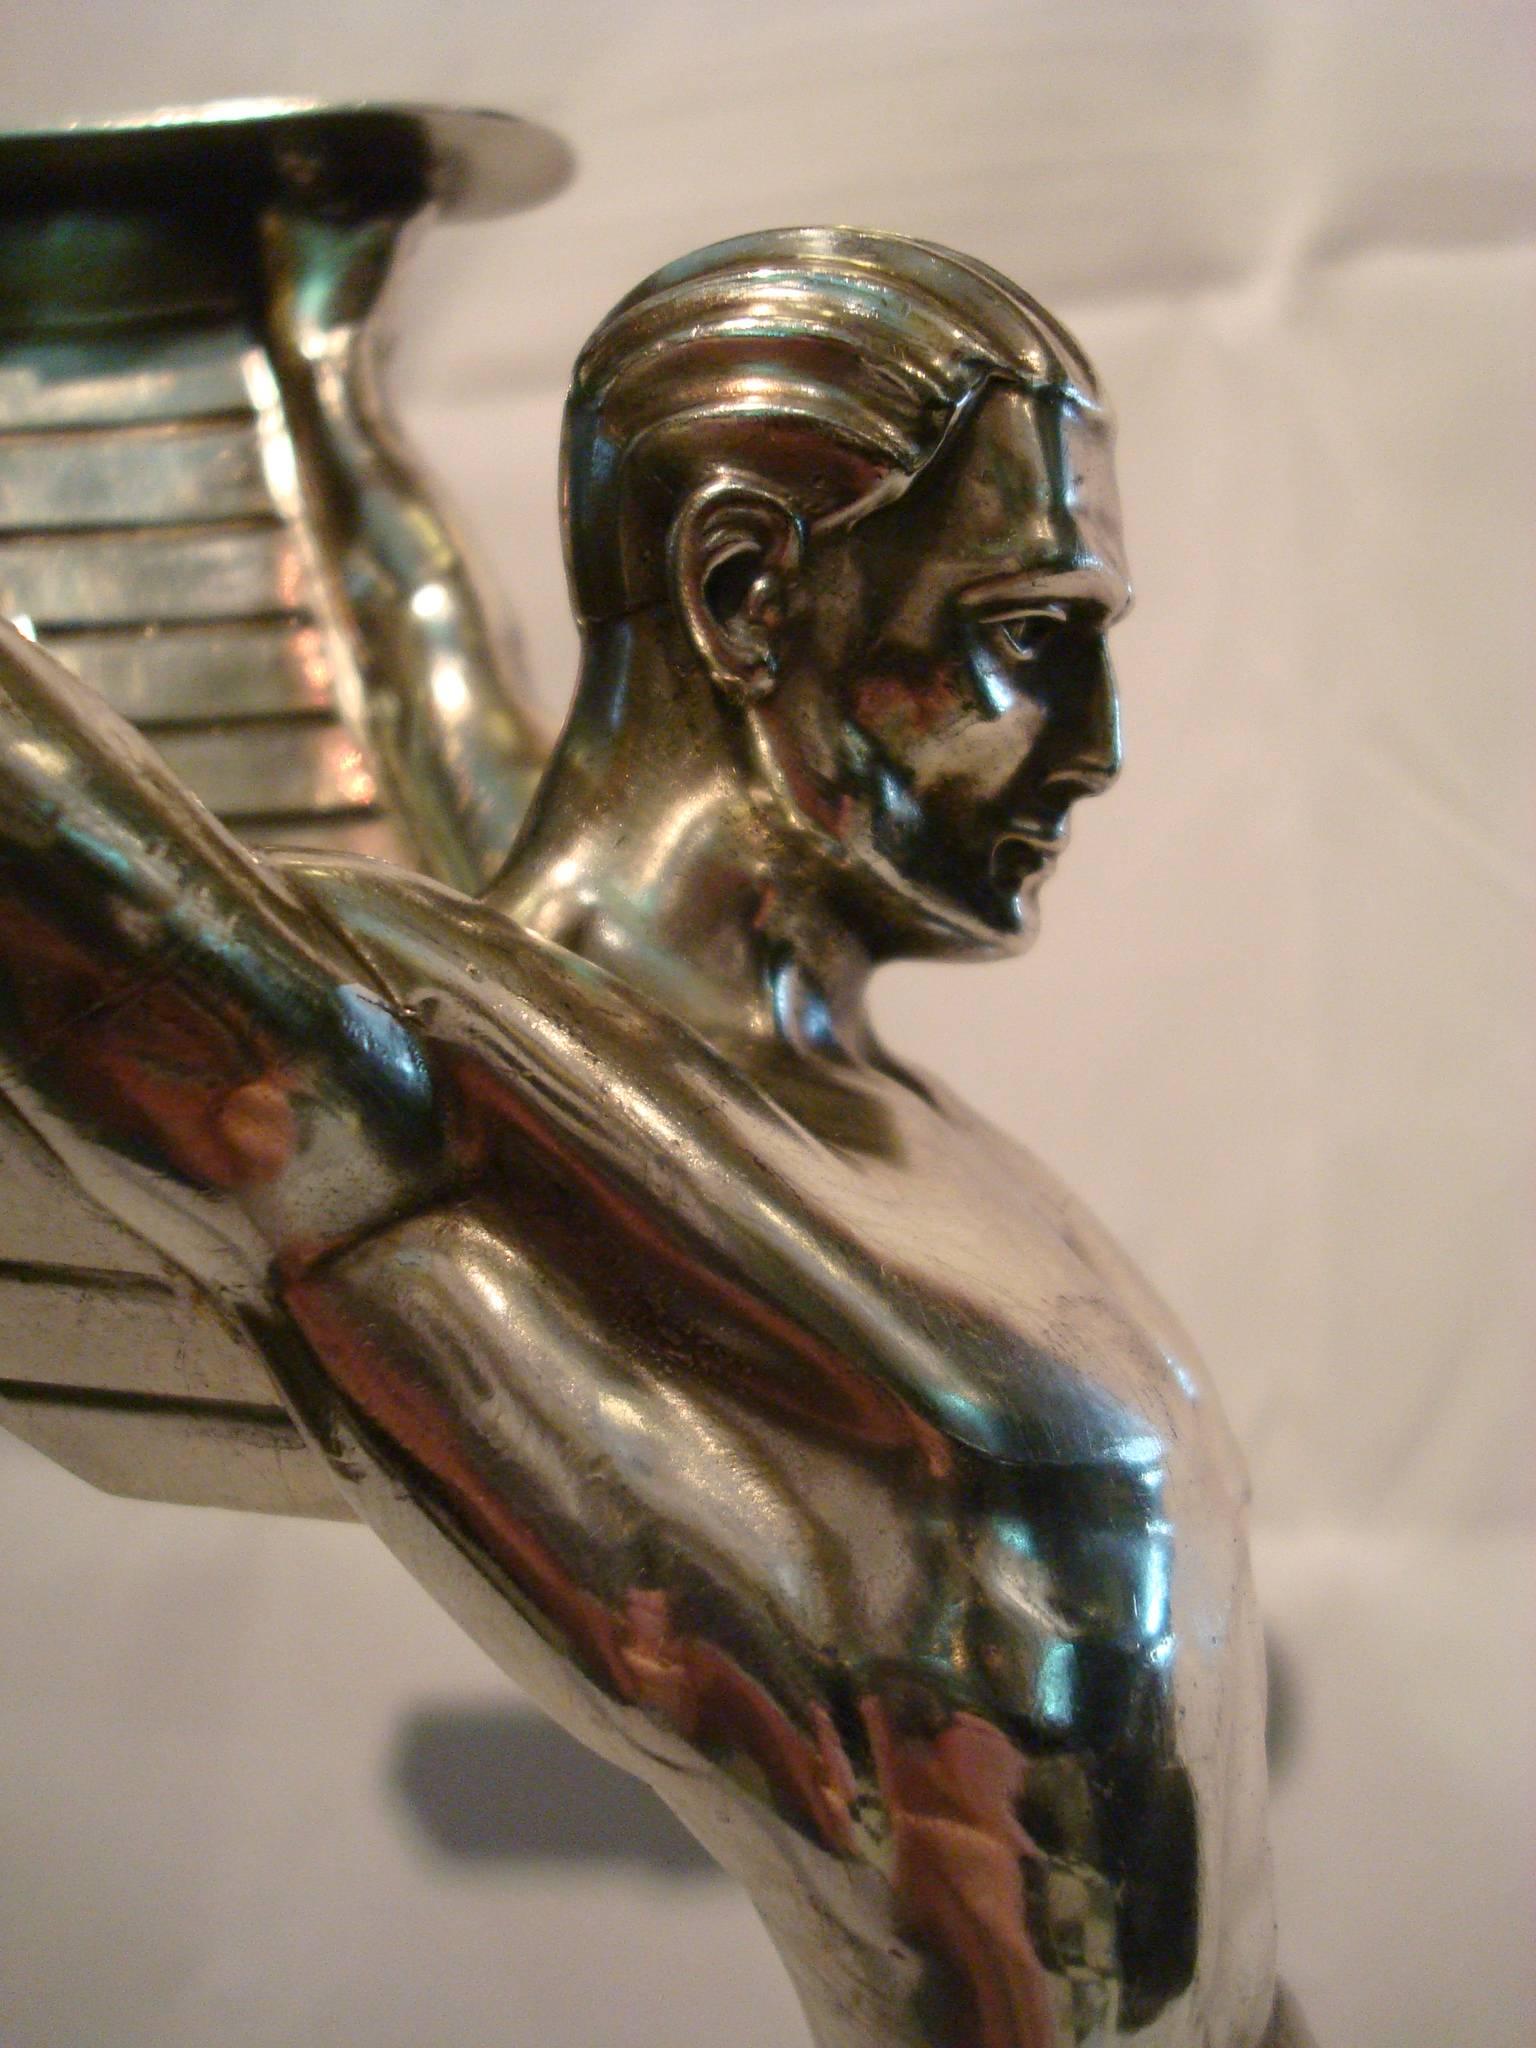 Icarus. Often related to Airplanes and Aviation items. 
Art Deco metal sculpture of an athletic nude man with stylized wings.
Attributed to Otto Schmidt Hofer.

In Greek mythology, Icarus is the son of the master craftsman Daedalus, the creator